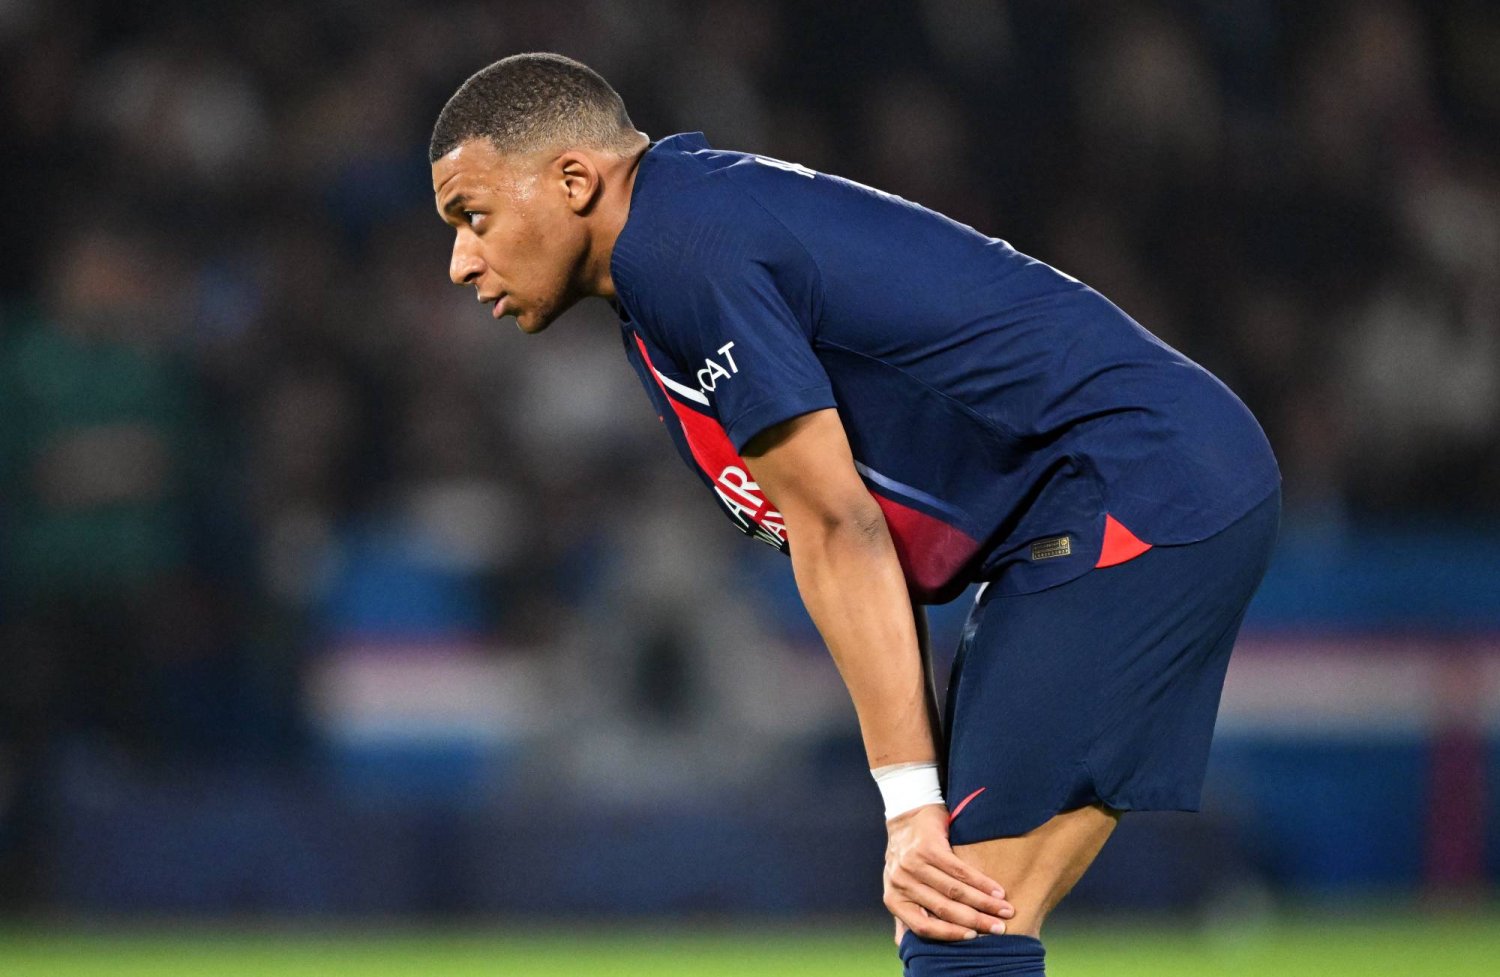 Mbappe Is Out Of Saint-Germain's List